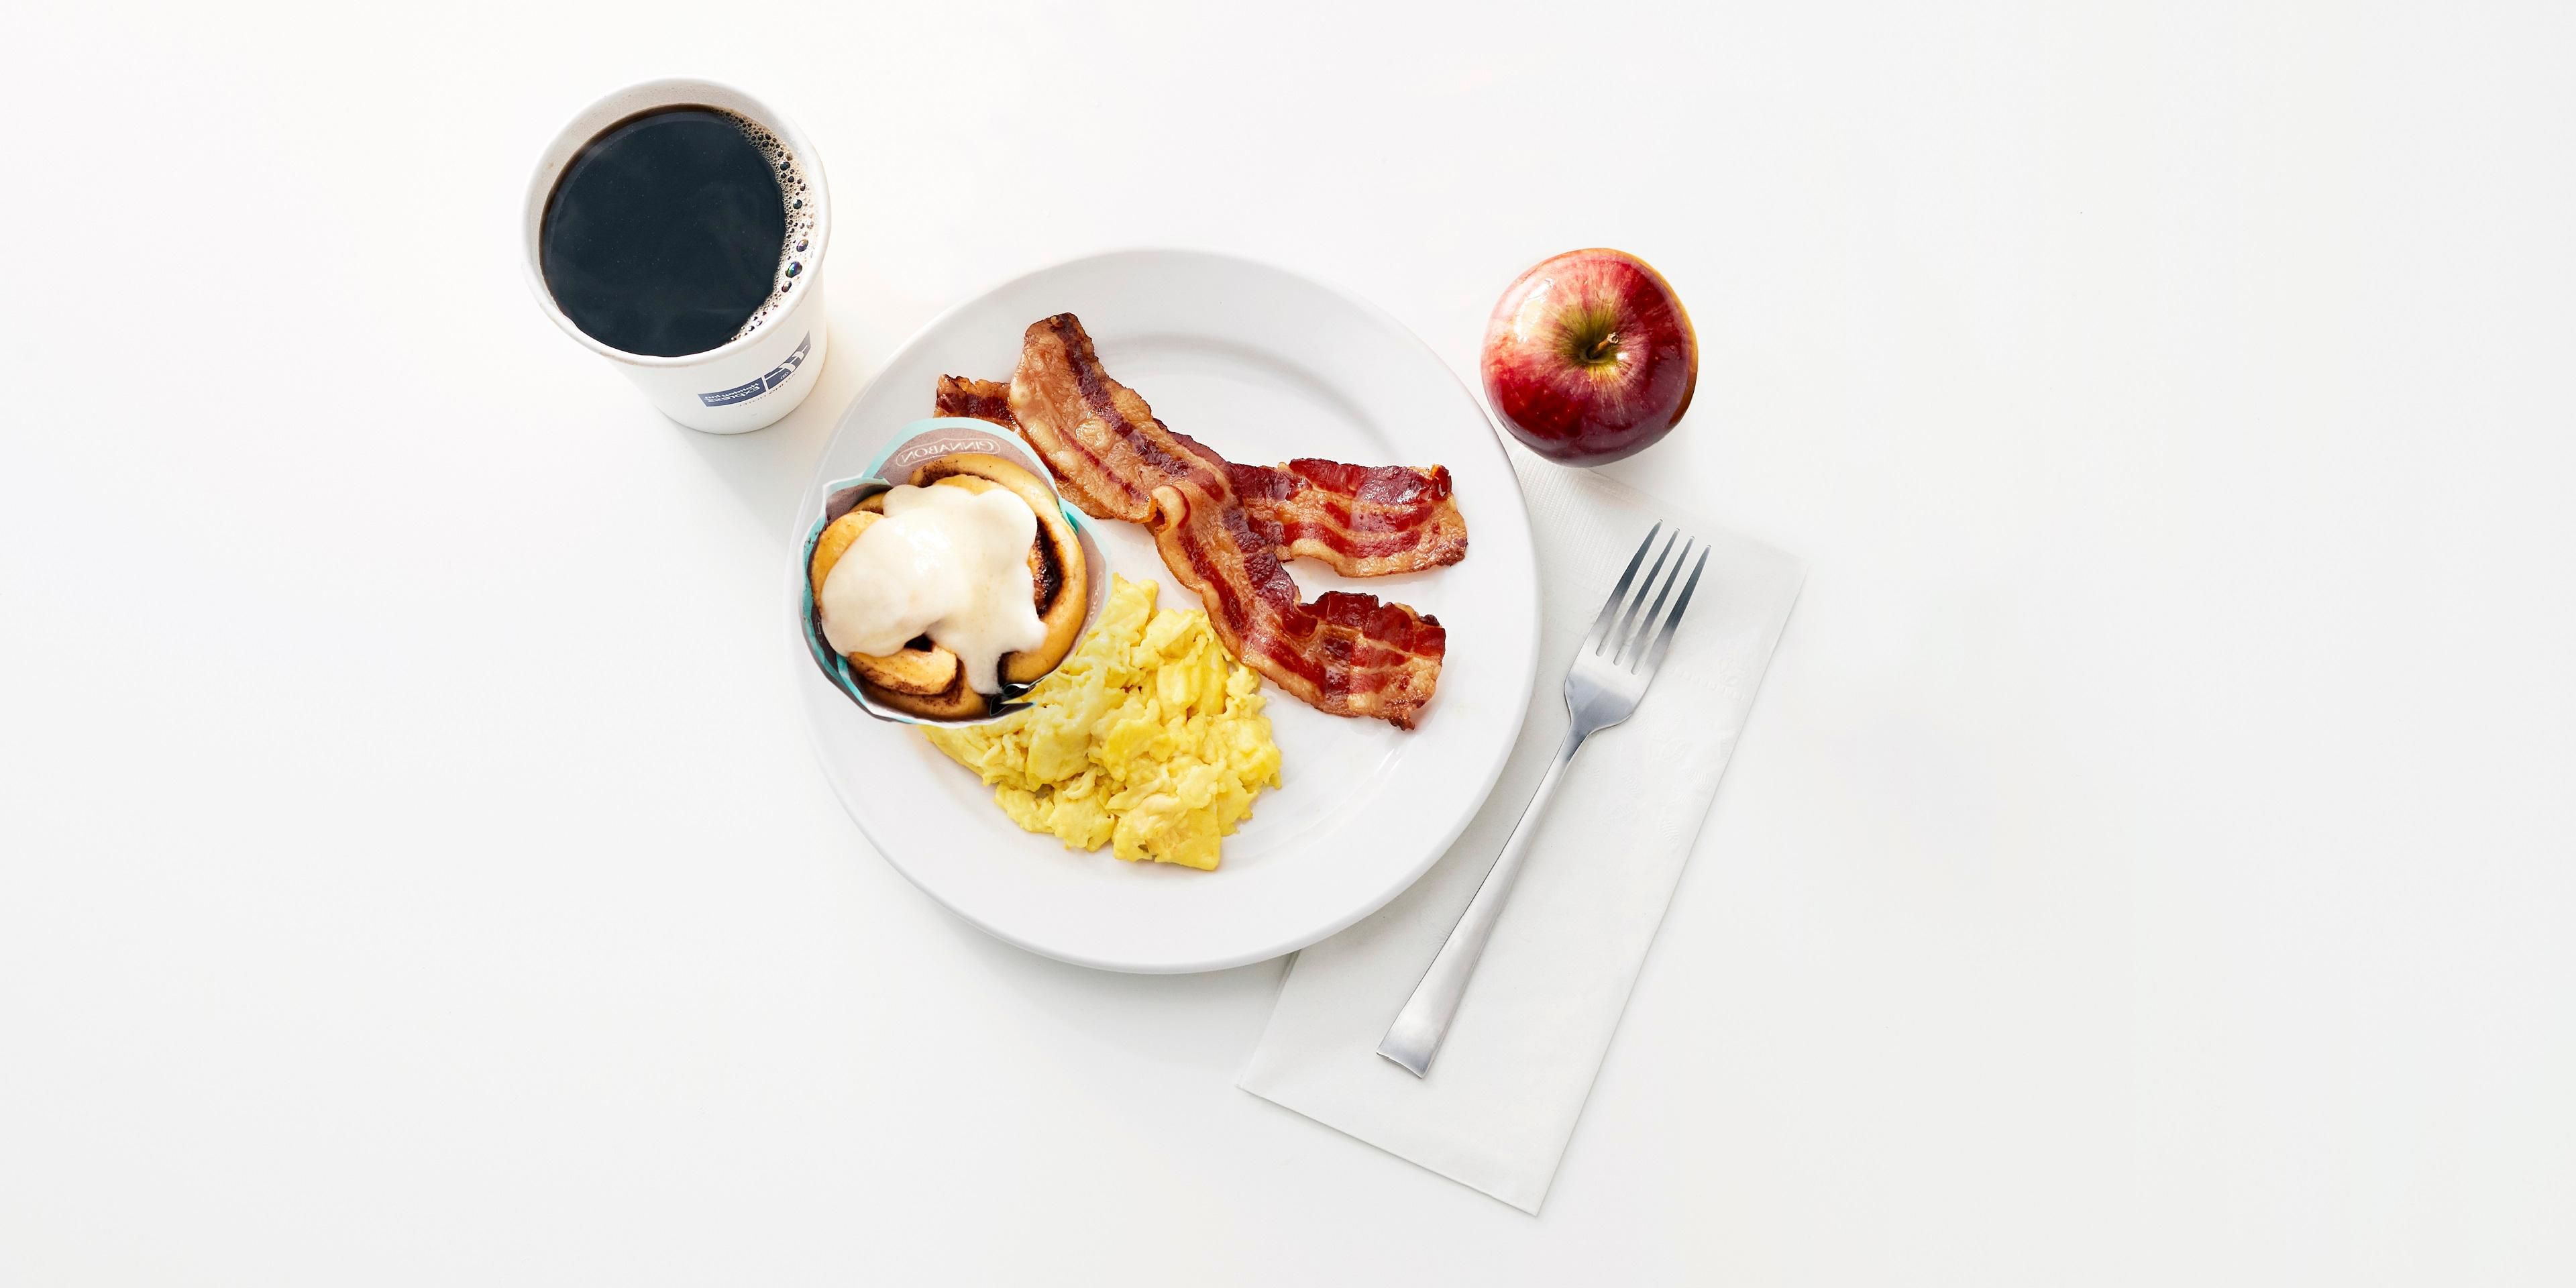 When you stay with us, our Express Start Breakfast offers a full breakfast daily including our "make your own pancakes“, eggs, bacon, sausage or cinnamon roll. If you want to indulge, we also offer lots of healthy options including fresh fruit, juice, yogurt, cereal, oatmeal and hard-boiled eggs.